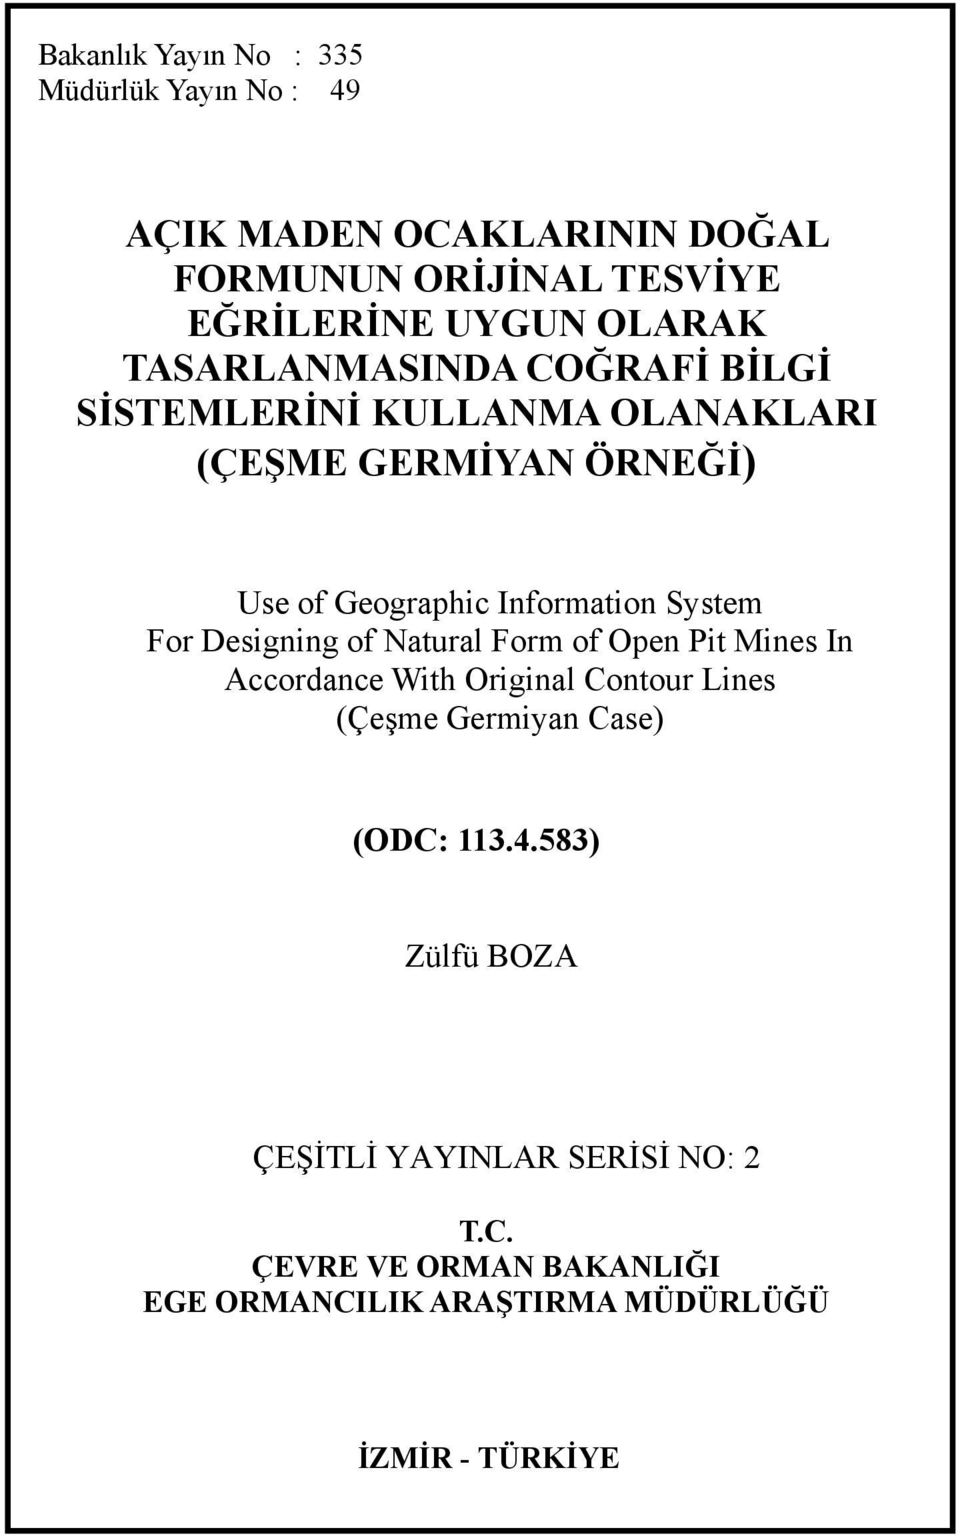 For Designing of Natural Form of Open Pit Mines In Accordance With Original Contour Lines (Çeşme Germiyan Case) (ODC: 113.4.